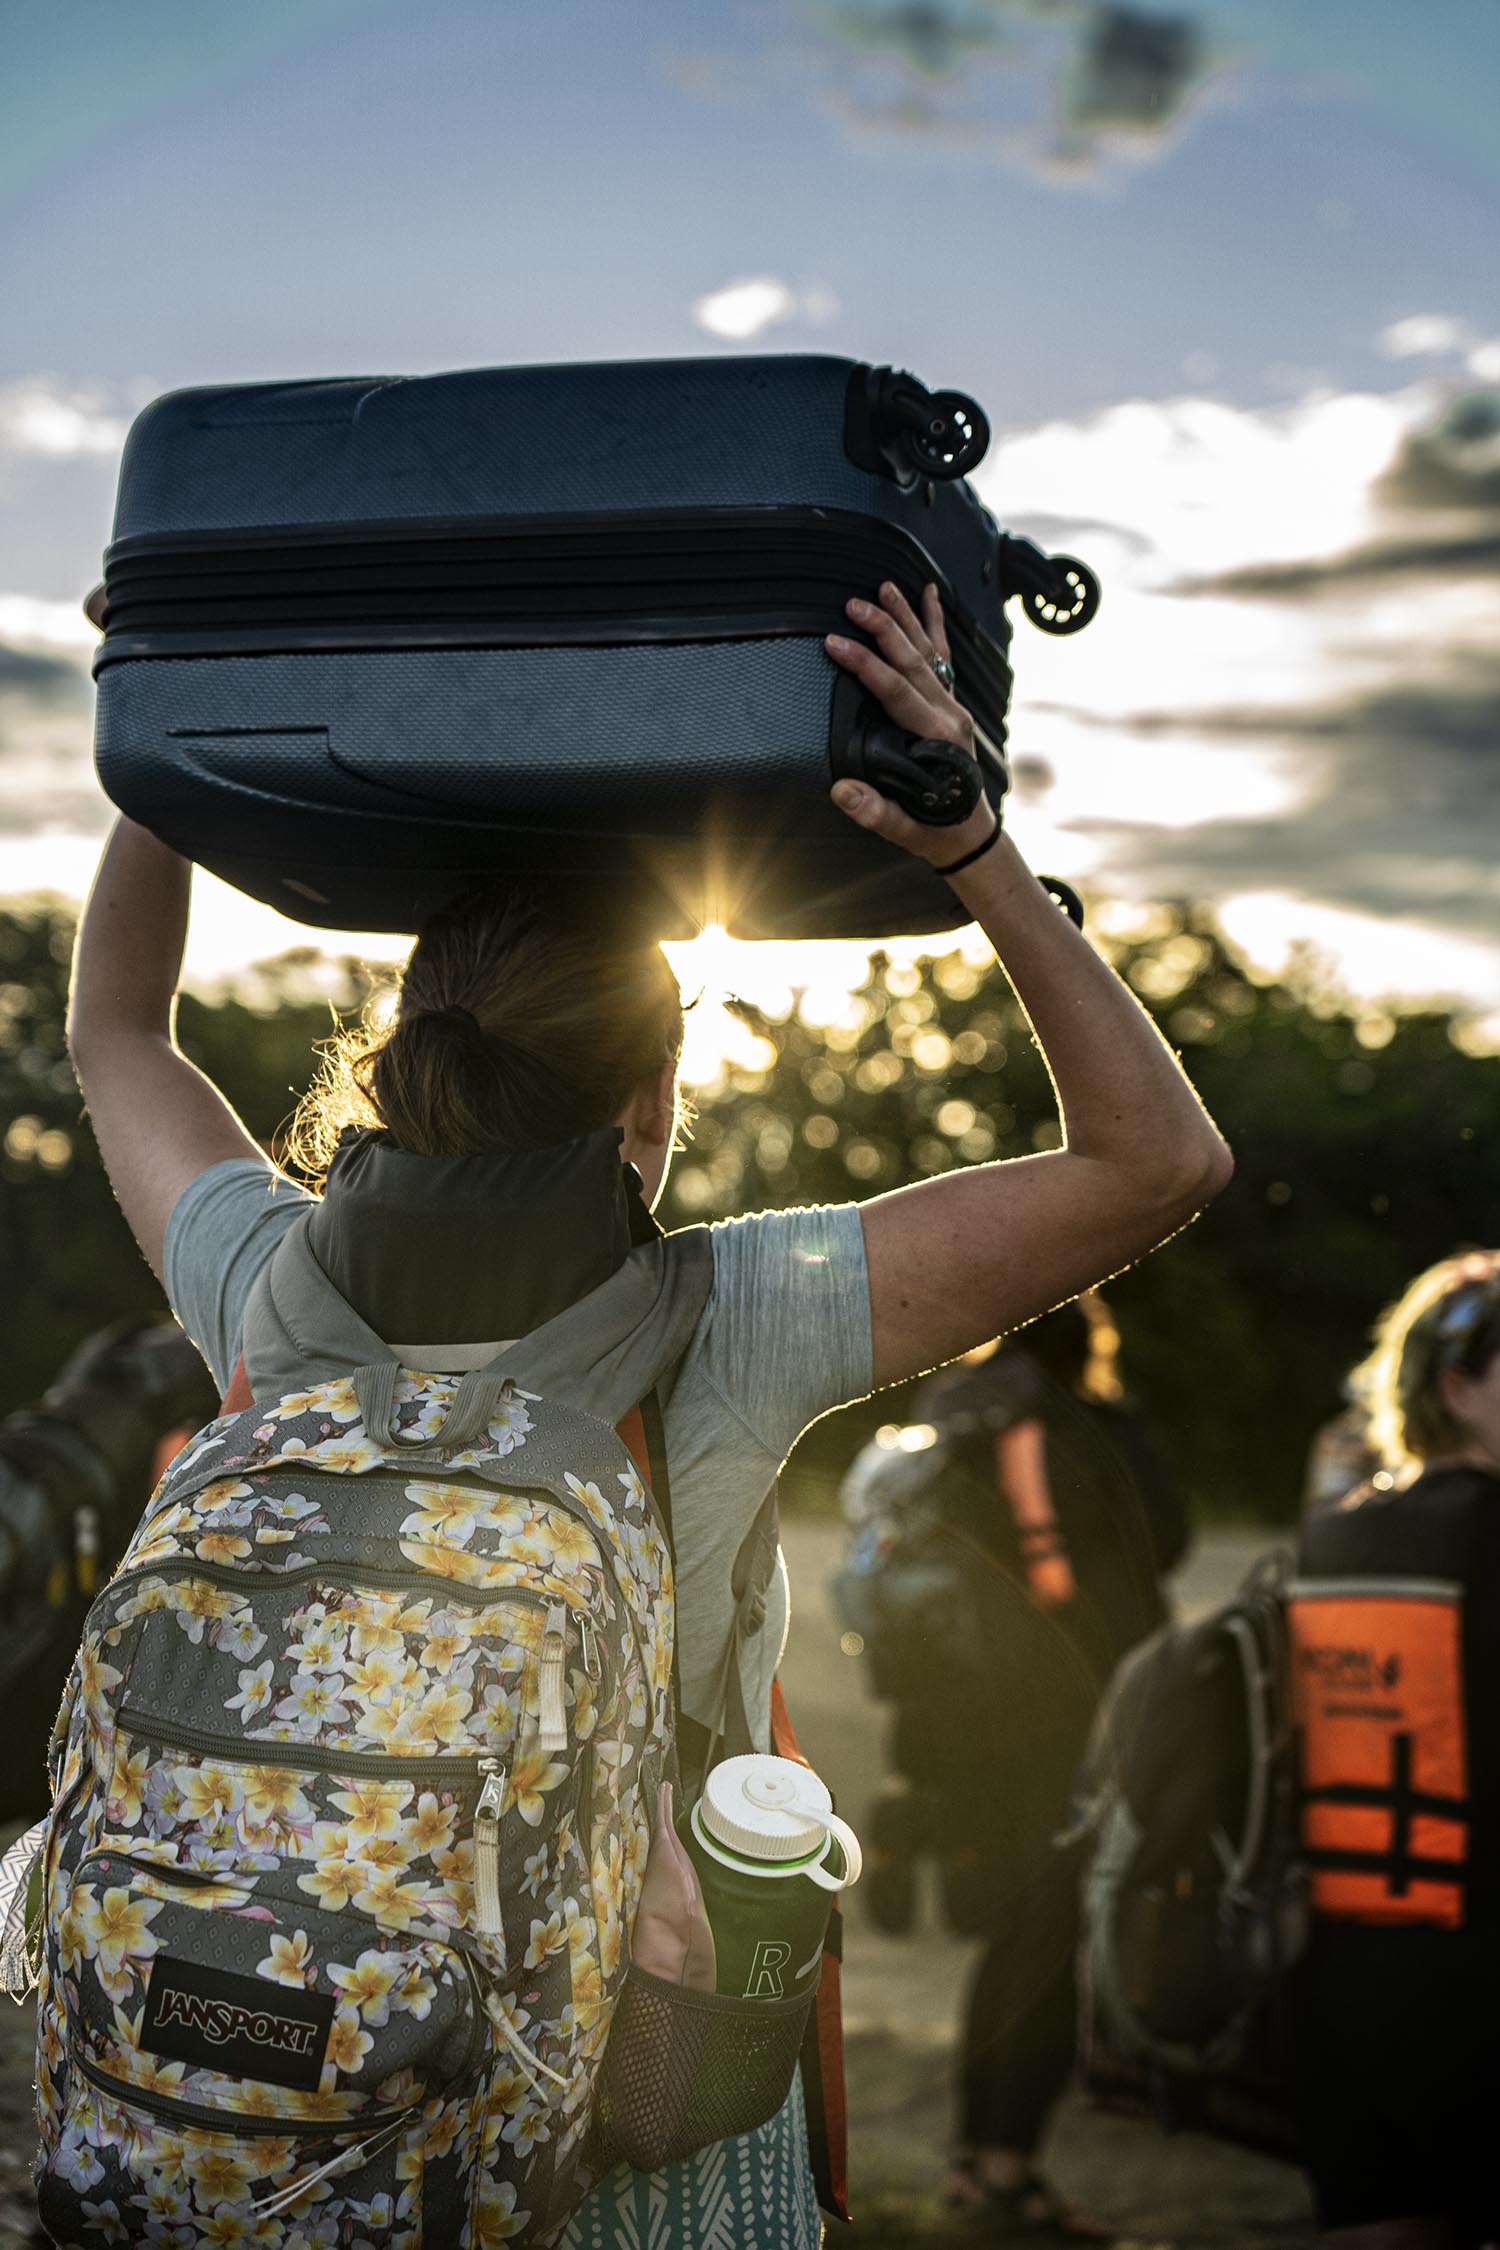 A student carrying a suitcase on their head, silhouetted by the setting sun